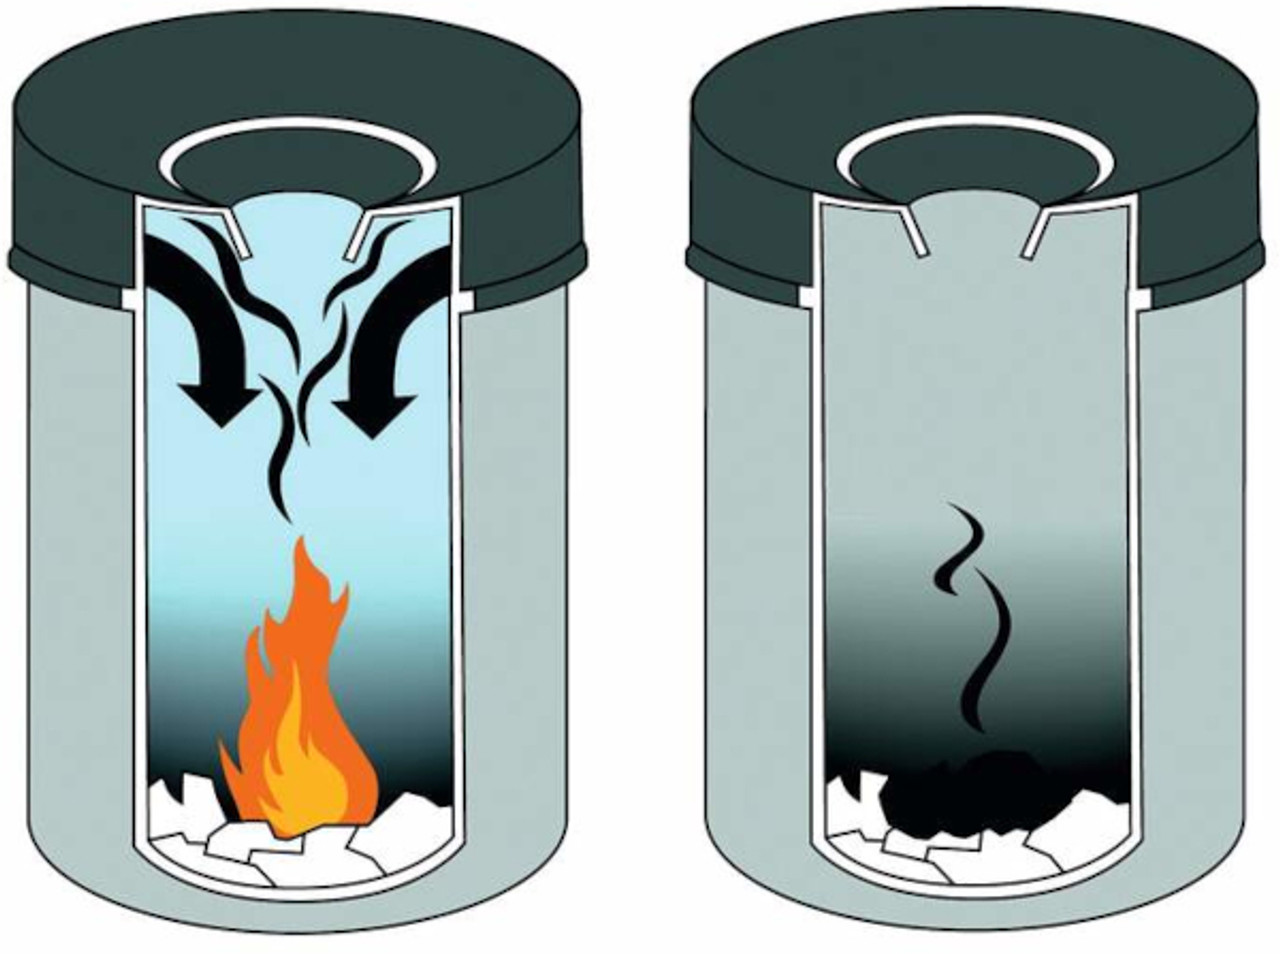 330601 - Diagram showing how the aluminium lid of the container helps to choke flames of fuel